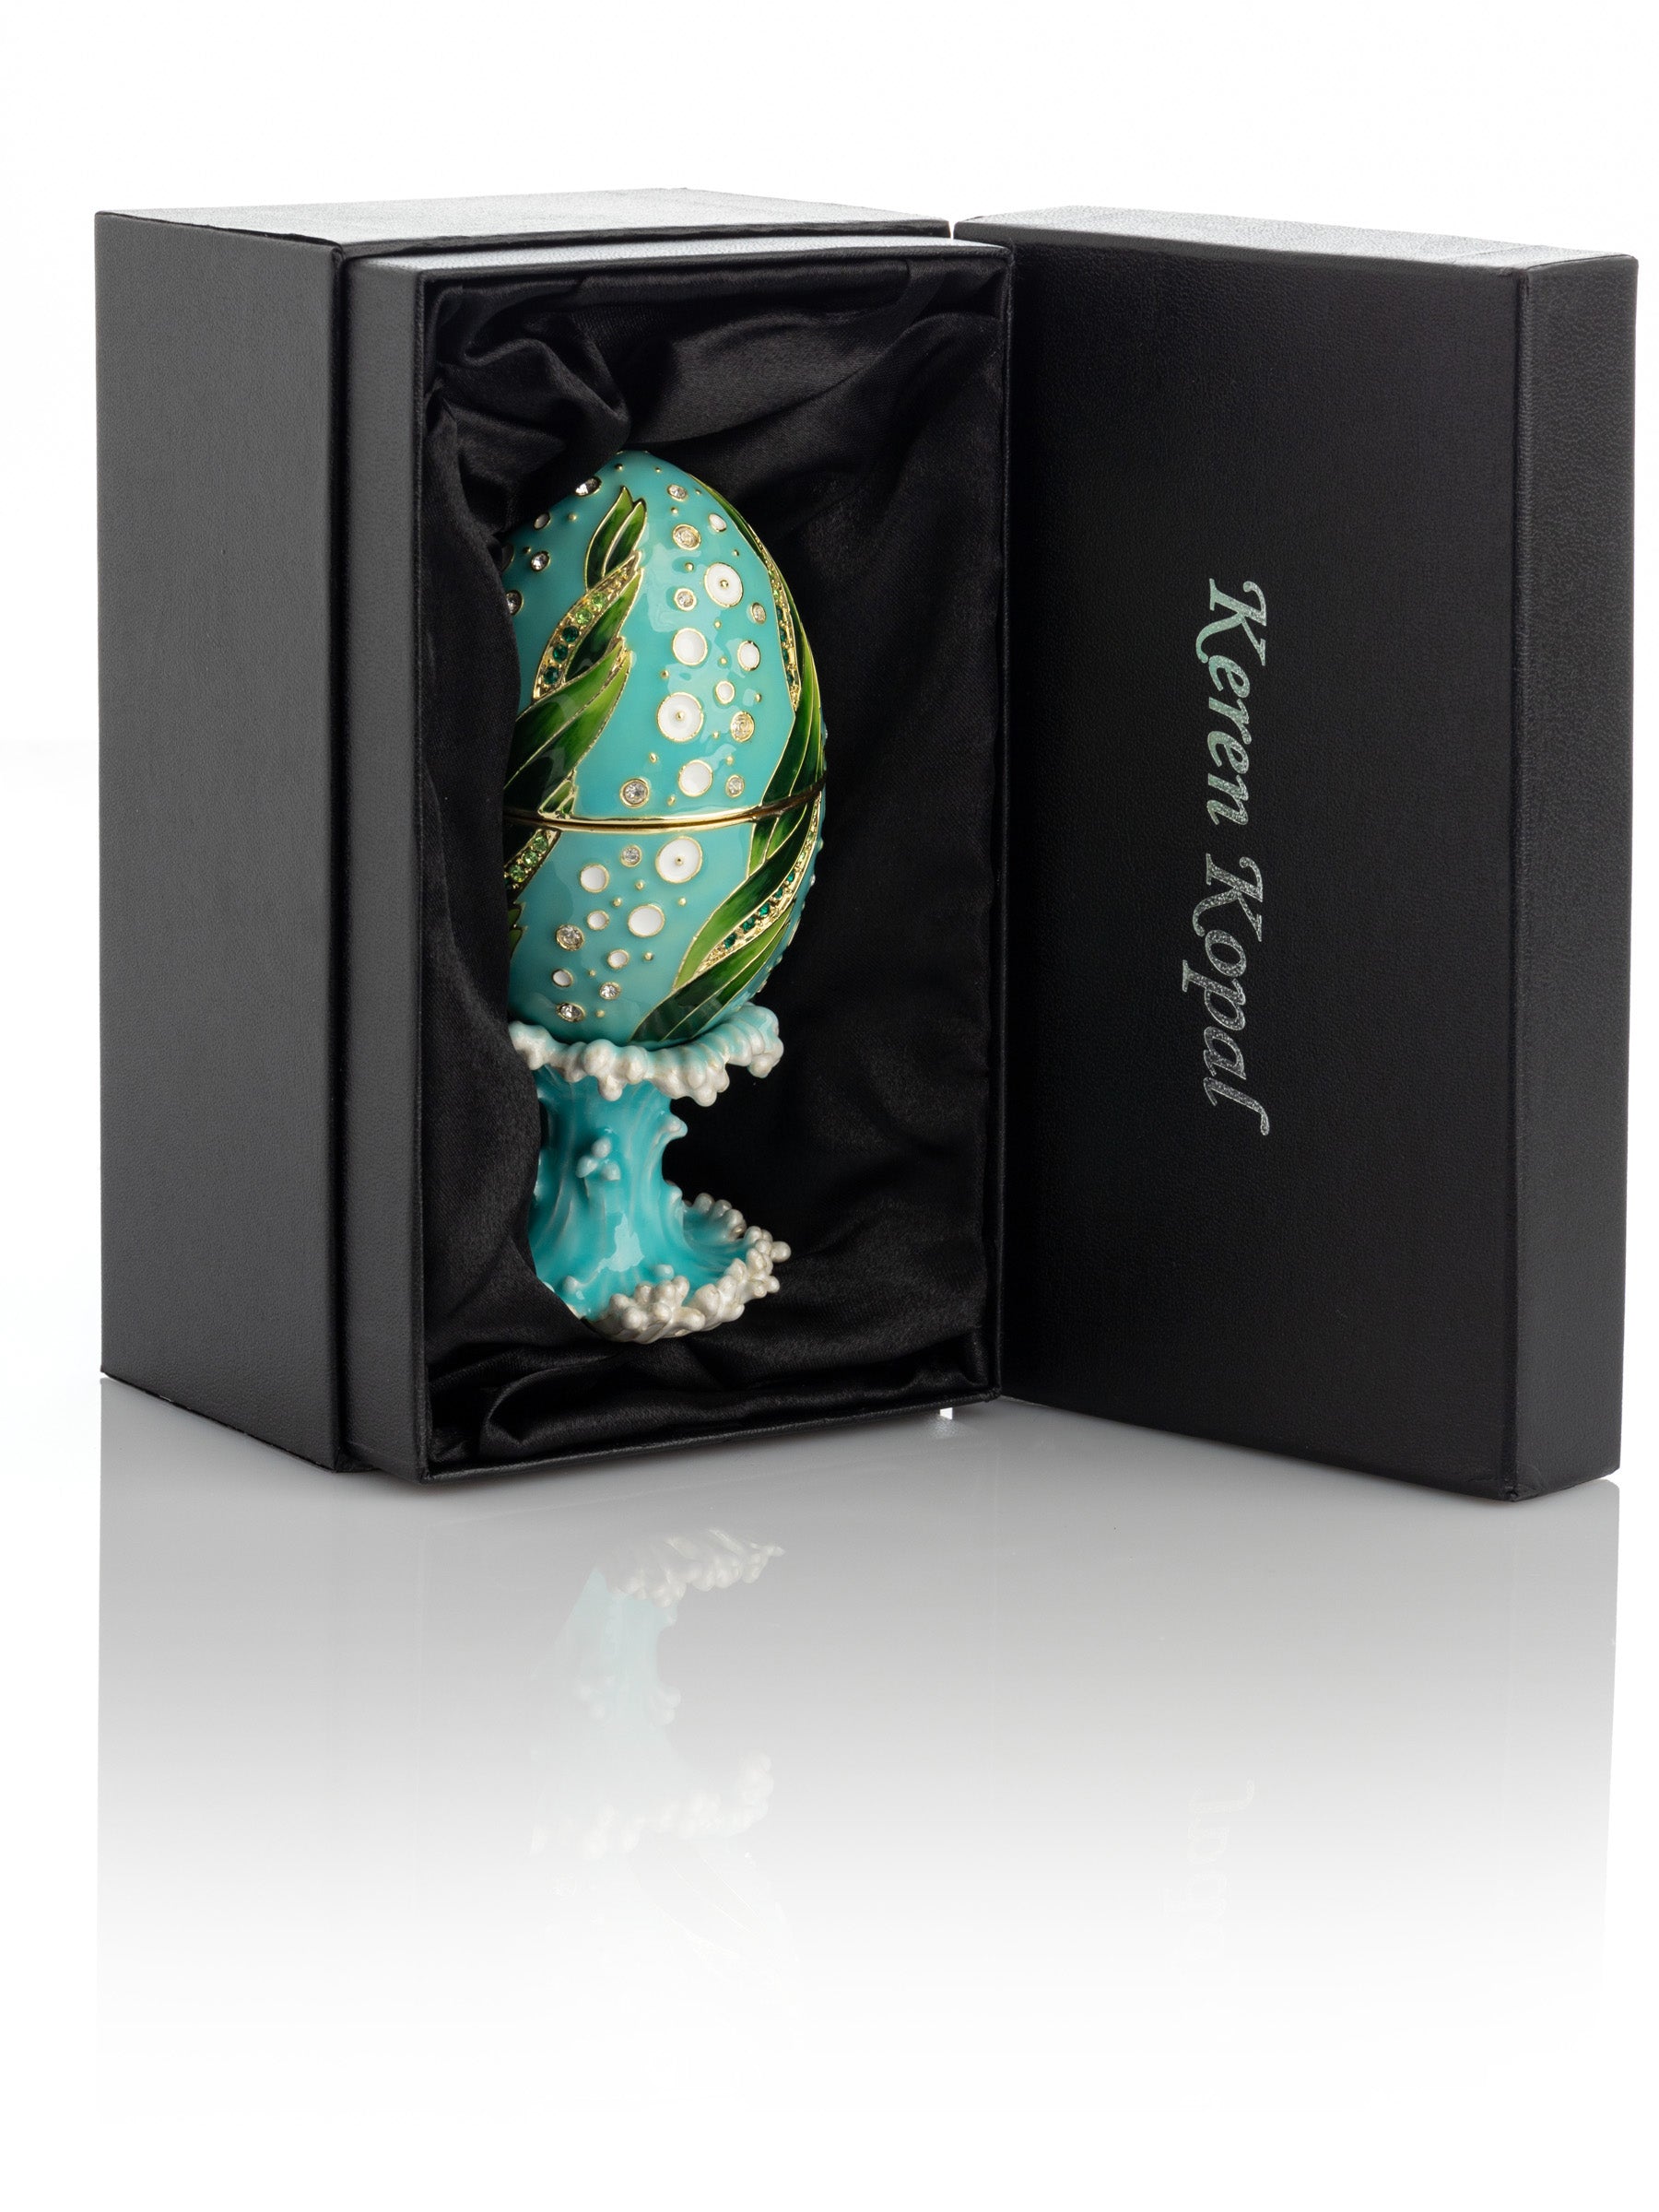 Turquoise Faberge Egg with 2 Frogs Surprise Inside